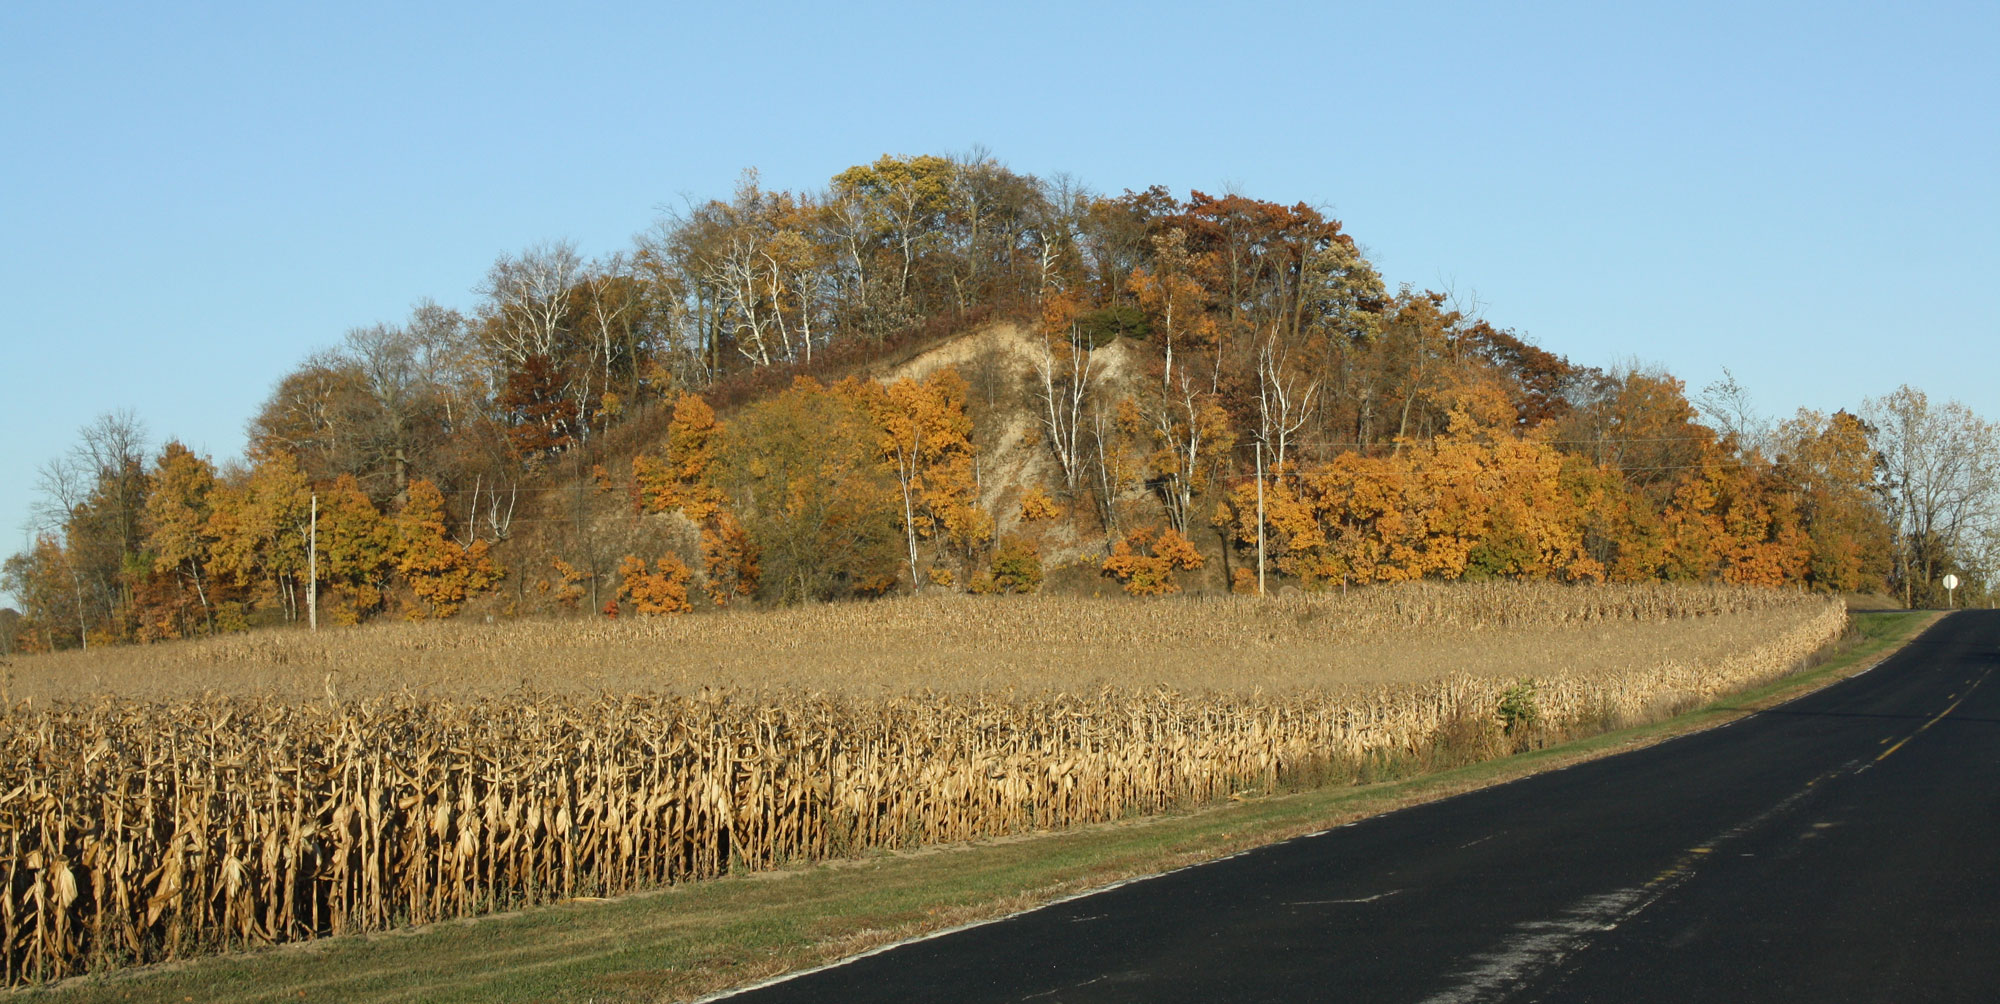 Photograph of a kame in Wisconsin. The photo shows a field of dried cornstalks and a paved road in the foreground. A rounded hill covered with trees rises in the background. 